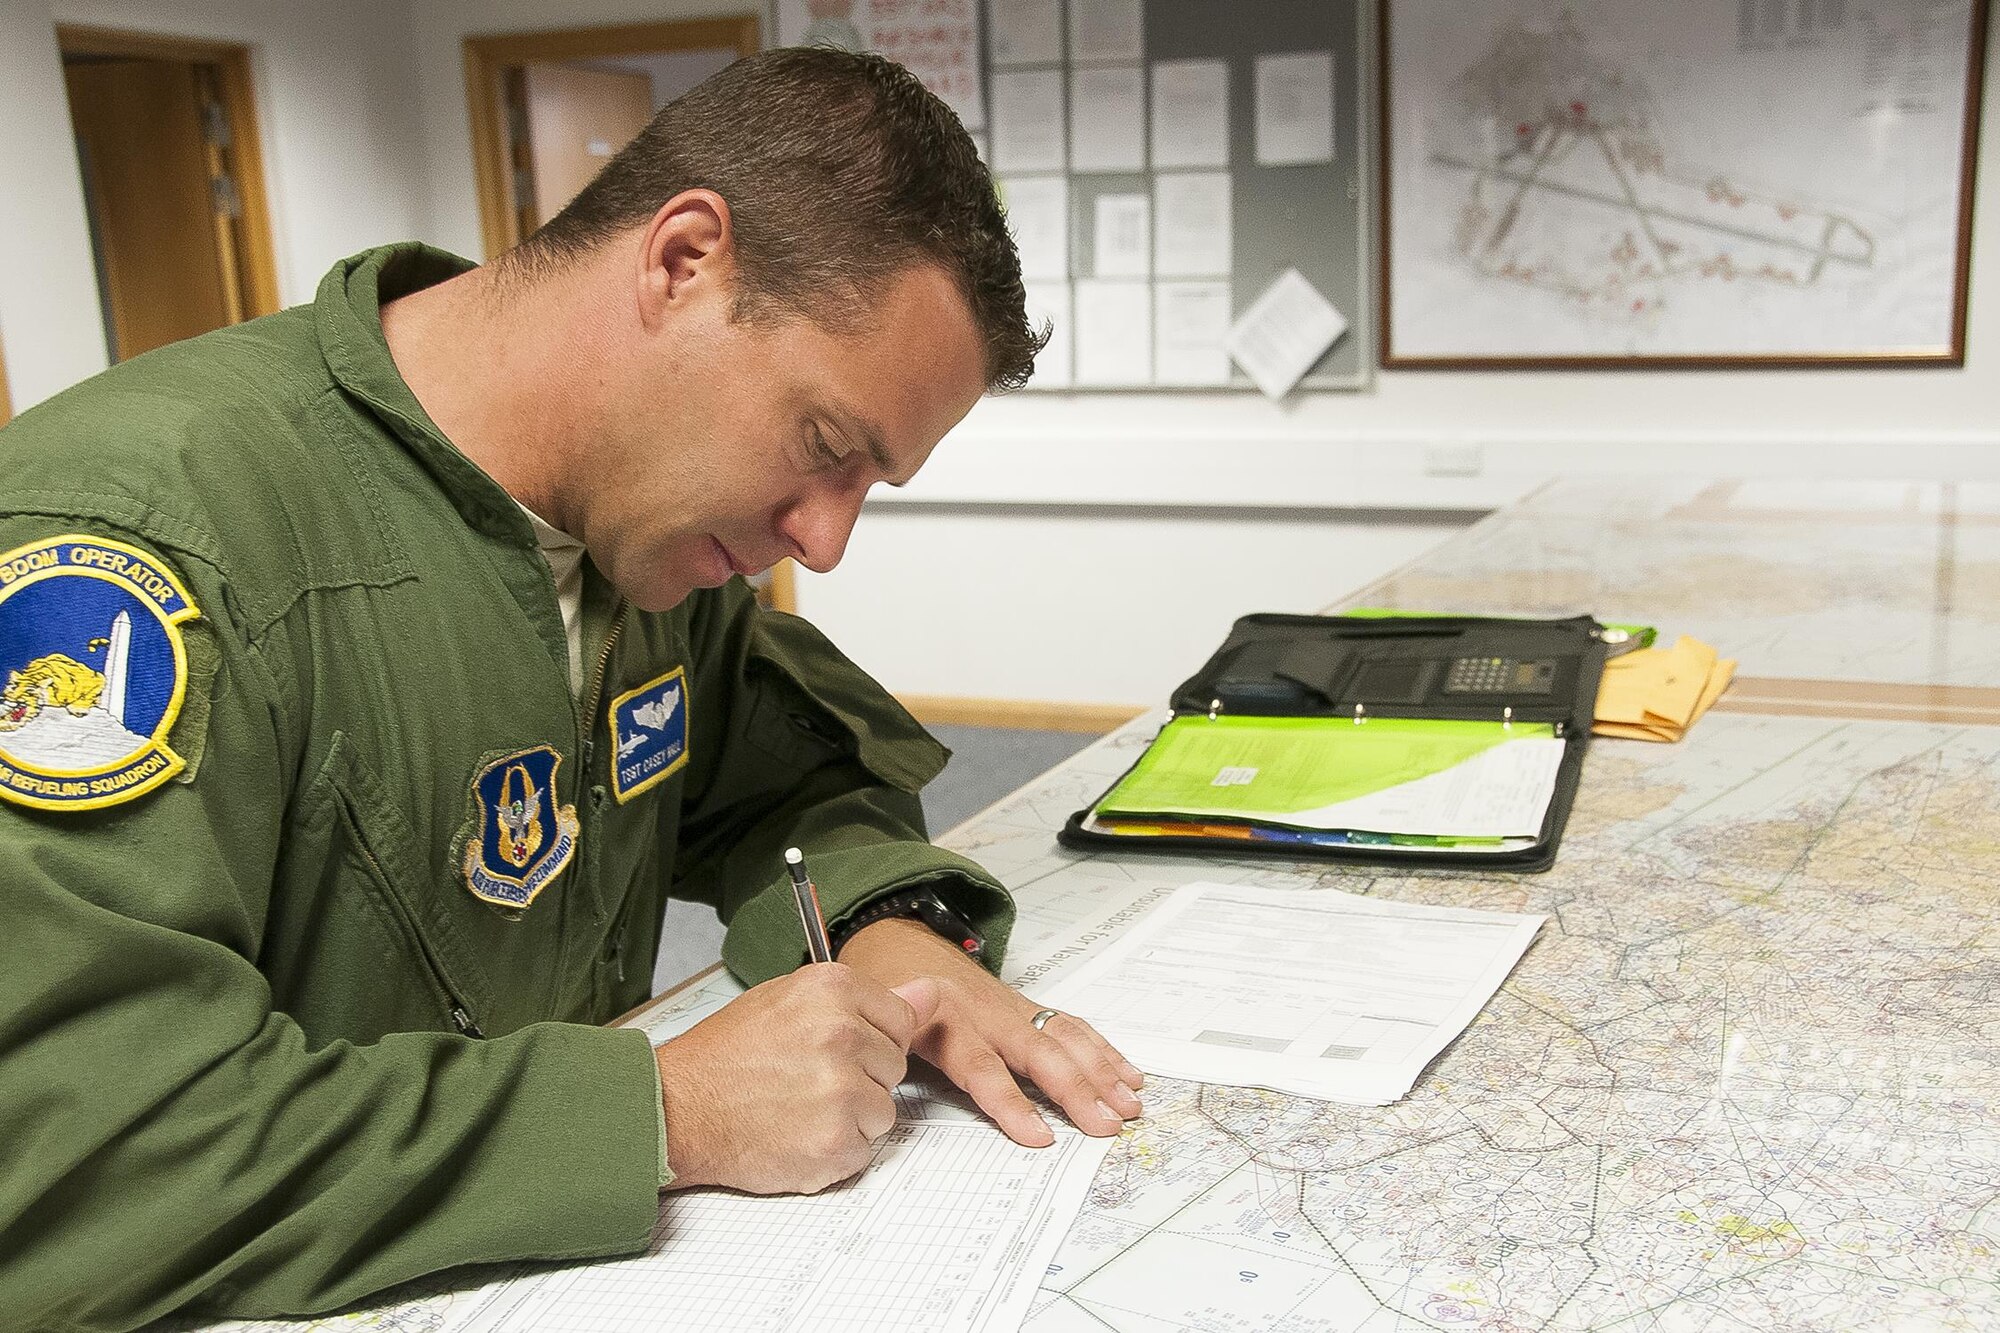 Technical Sgt. Casey Hall, 756th Air Refueling Squadron boom operator, fills out paperwork prior to a refueling mission at Royal Air Force Base Mildenhall, England, June 13, 2016. Boom operators play an integral role in pre-flight preparation and are responsible for fuel delivery from 459th Air Refueling Wing's KC-135R Stratotankers to various receivers. Members of the 459th ARW, to include pilots, boom operators and maintainers, are in England from mid-June to late July to help provide training and refueling support for Operation Atlantic Resolve. OAR aims to ensure peace and stability in Eastern Europe in the wake of Russia’s intervention in Ukraine.  (U.S. Air Force photo/Staff Sgt. Kat Justen)